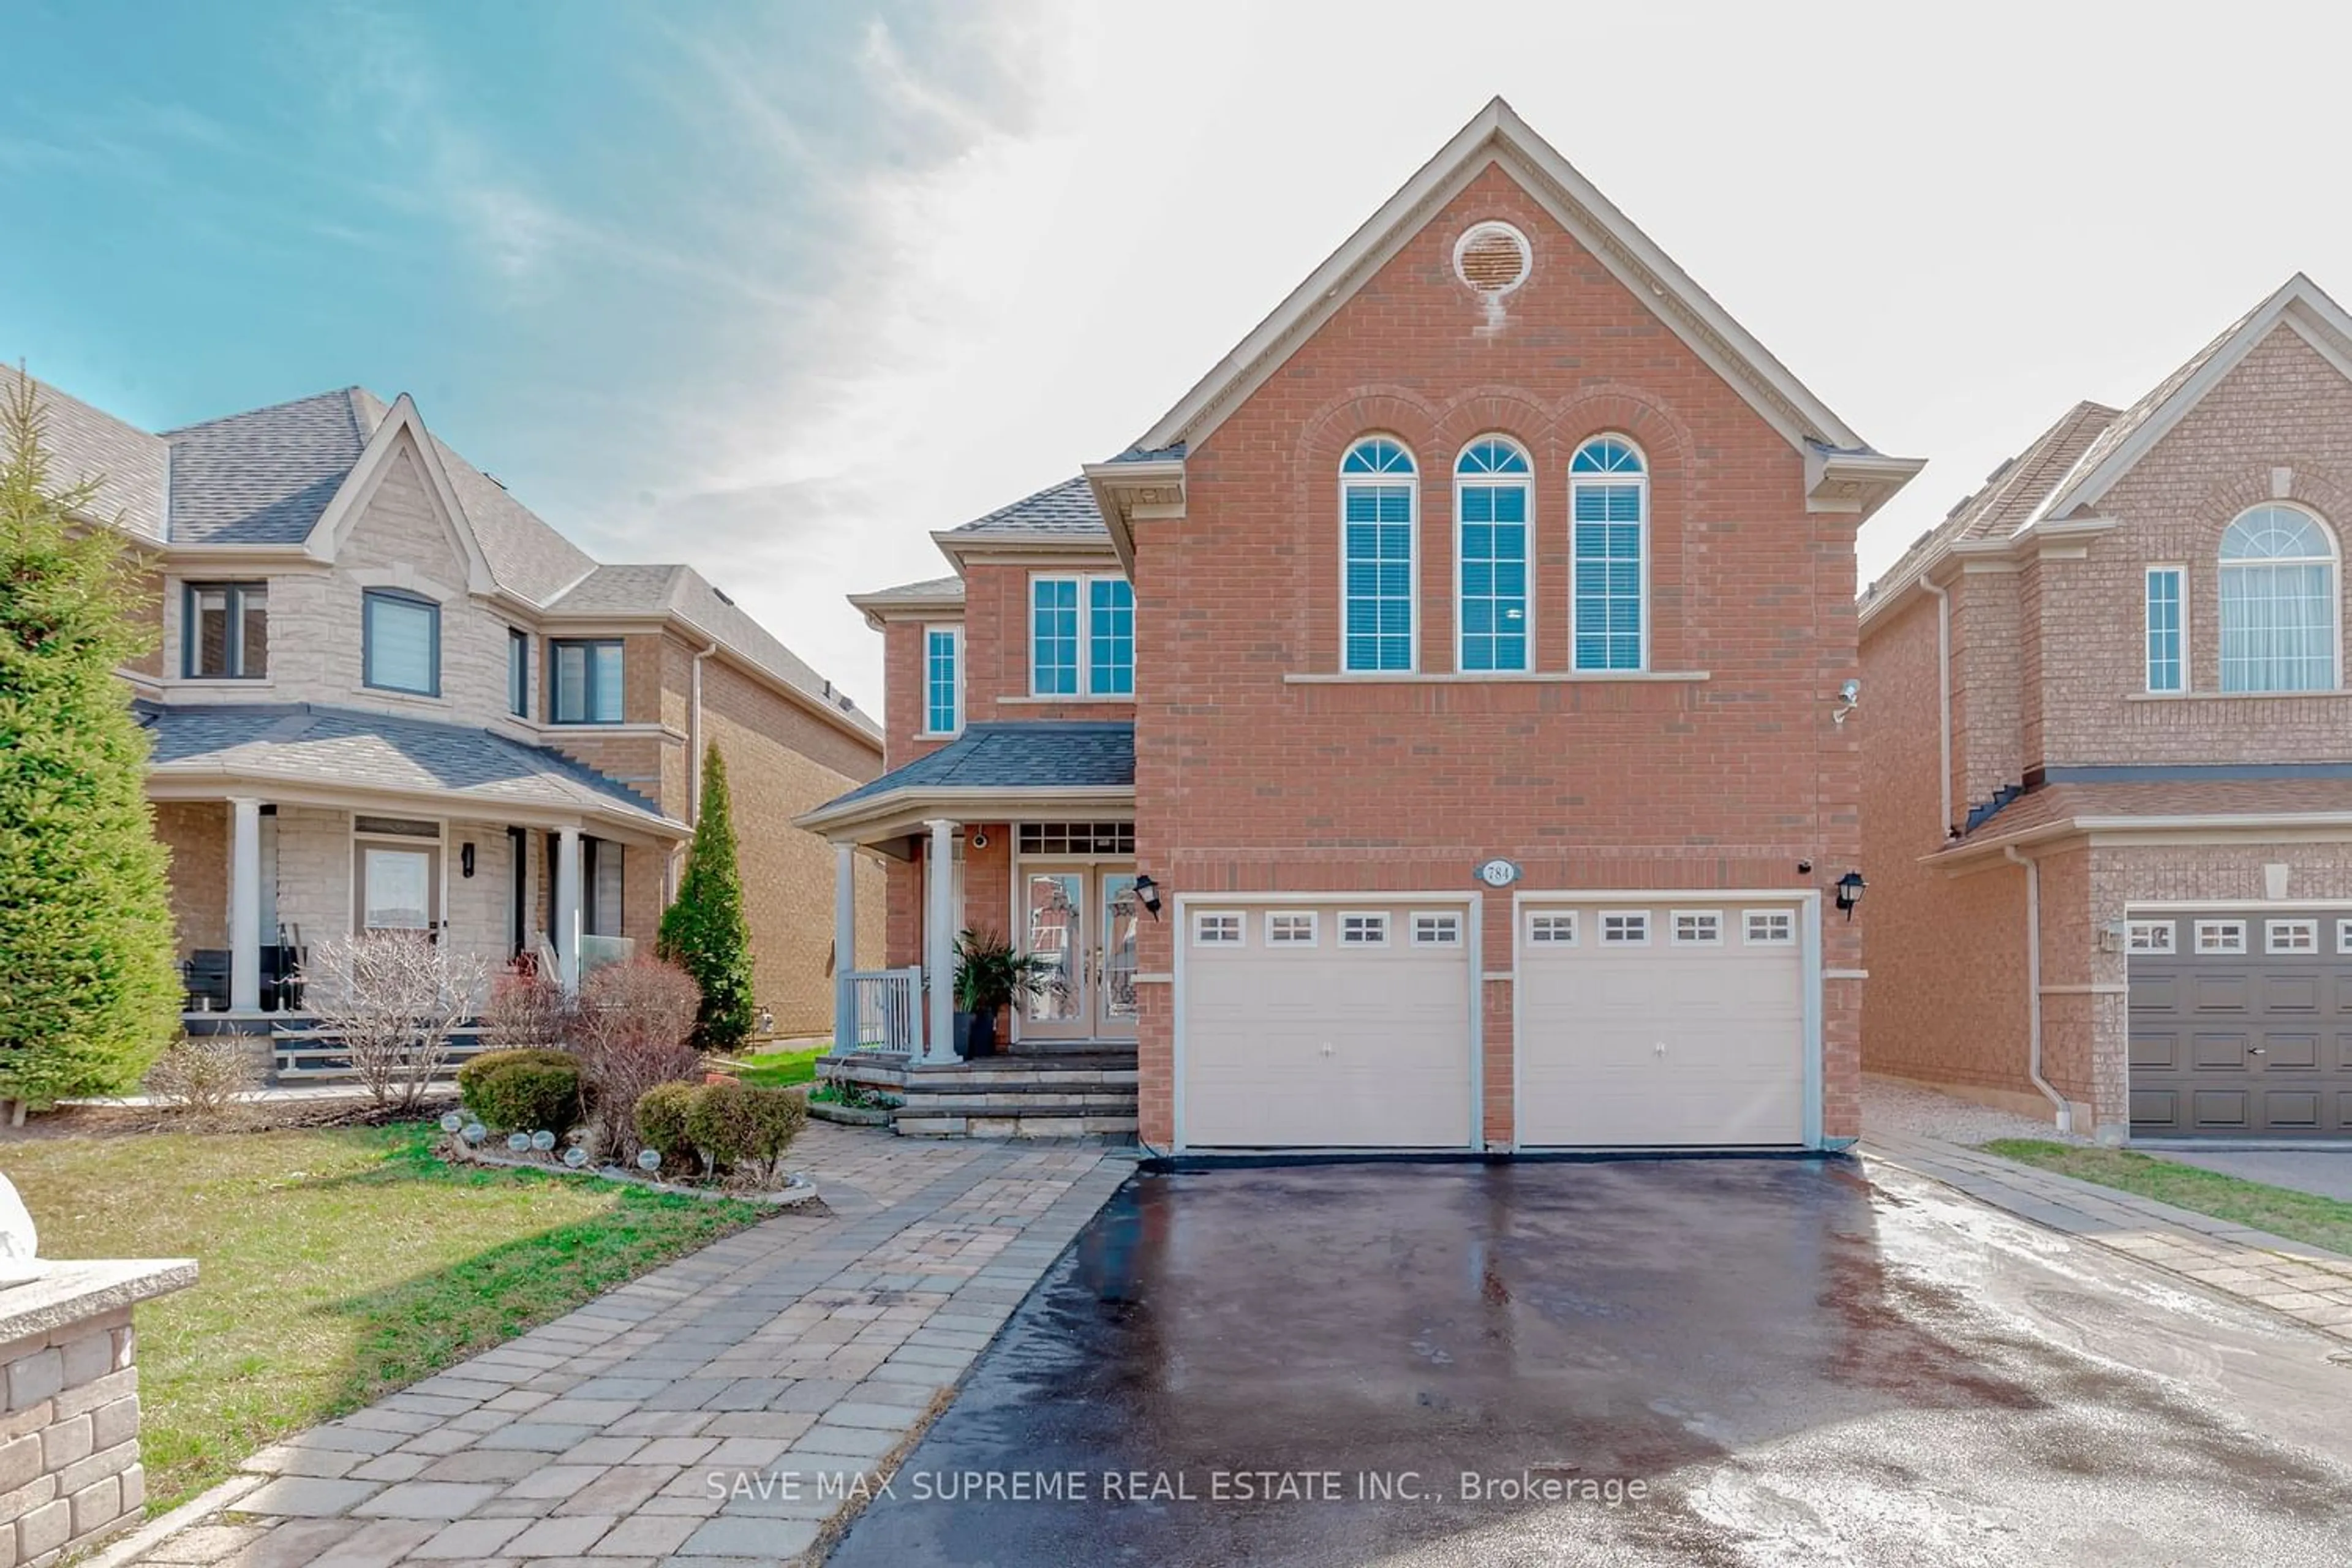 Frontside or backside of a home for 784 Sombrero Way, Mississauga Ontario L5W 1S8